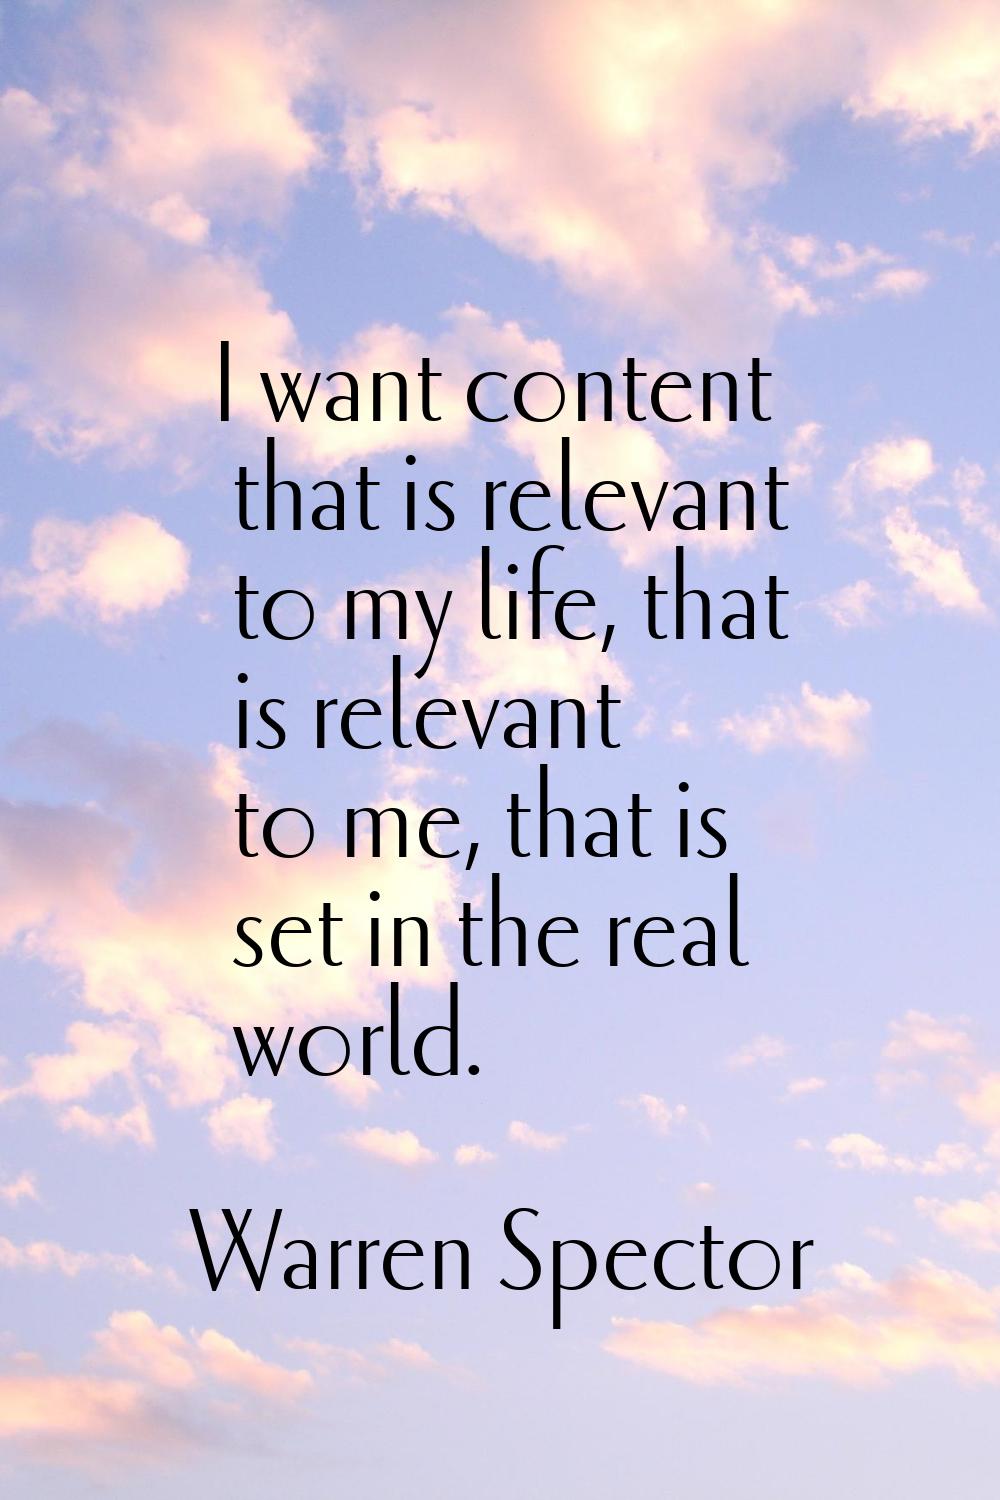 I want content that is relevant to my life, that is relevant to me, that is set in the real world.